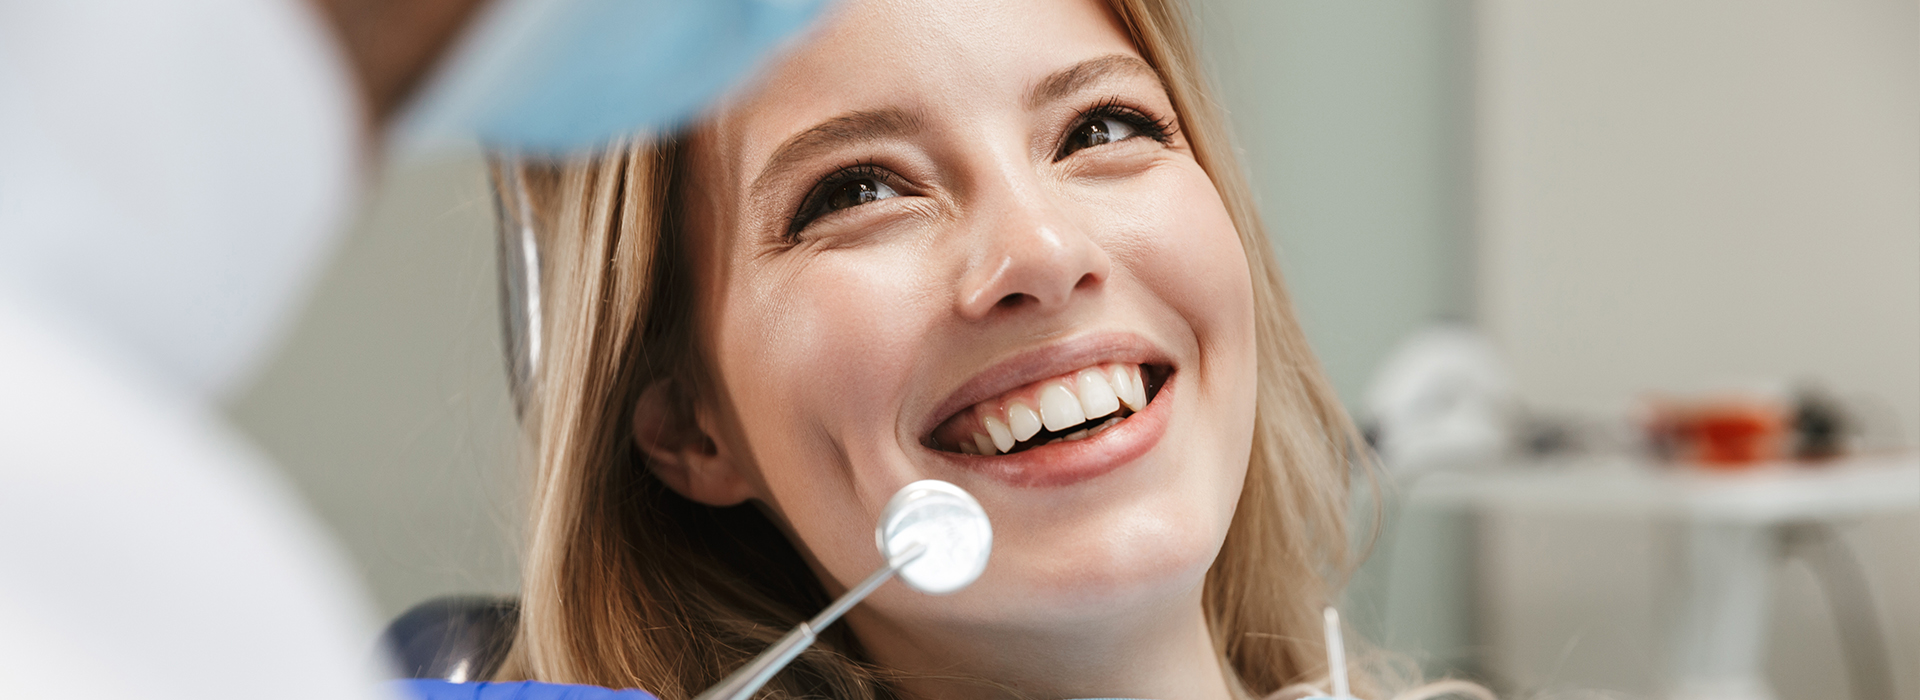 iSmile Dental | Extractions, E4D and Botox reg 